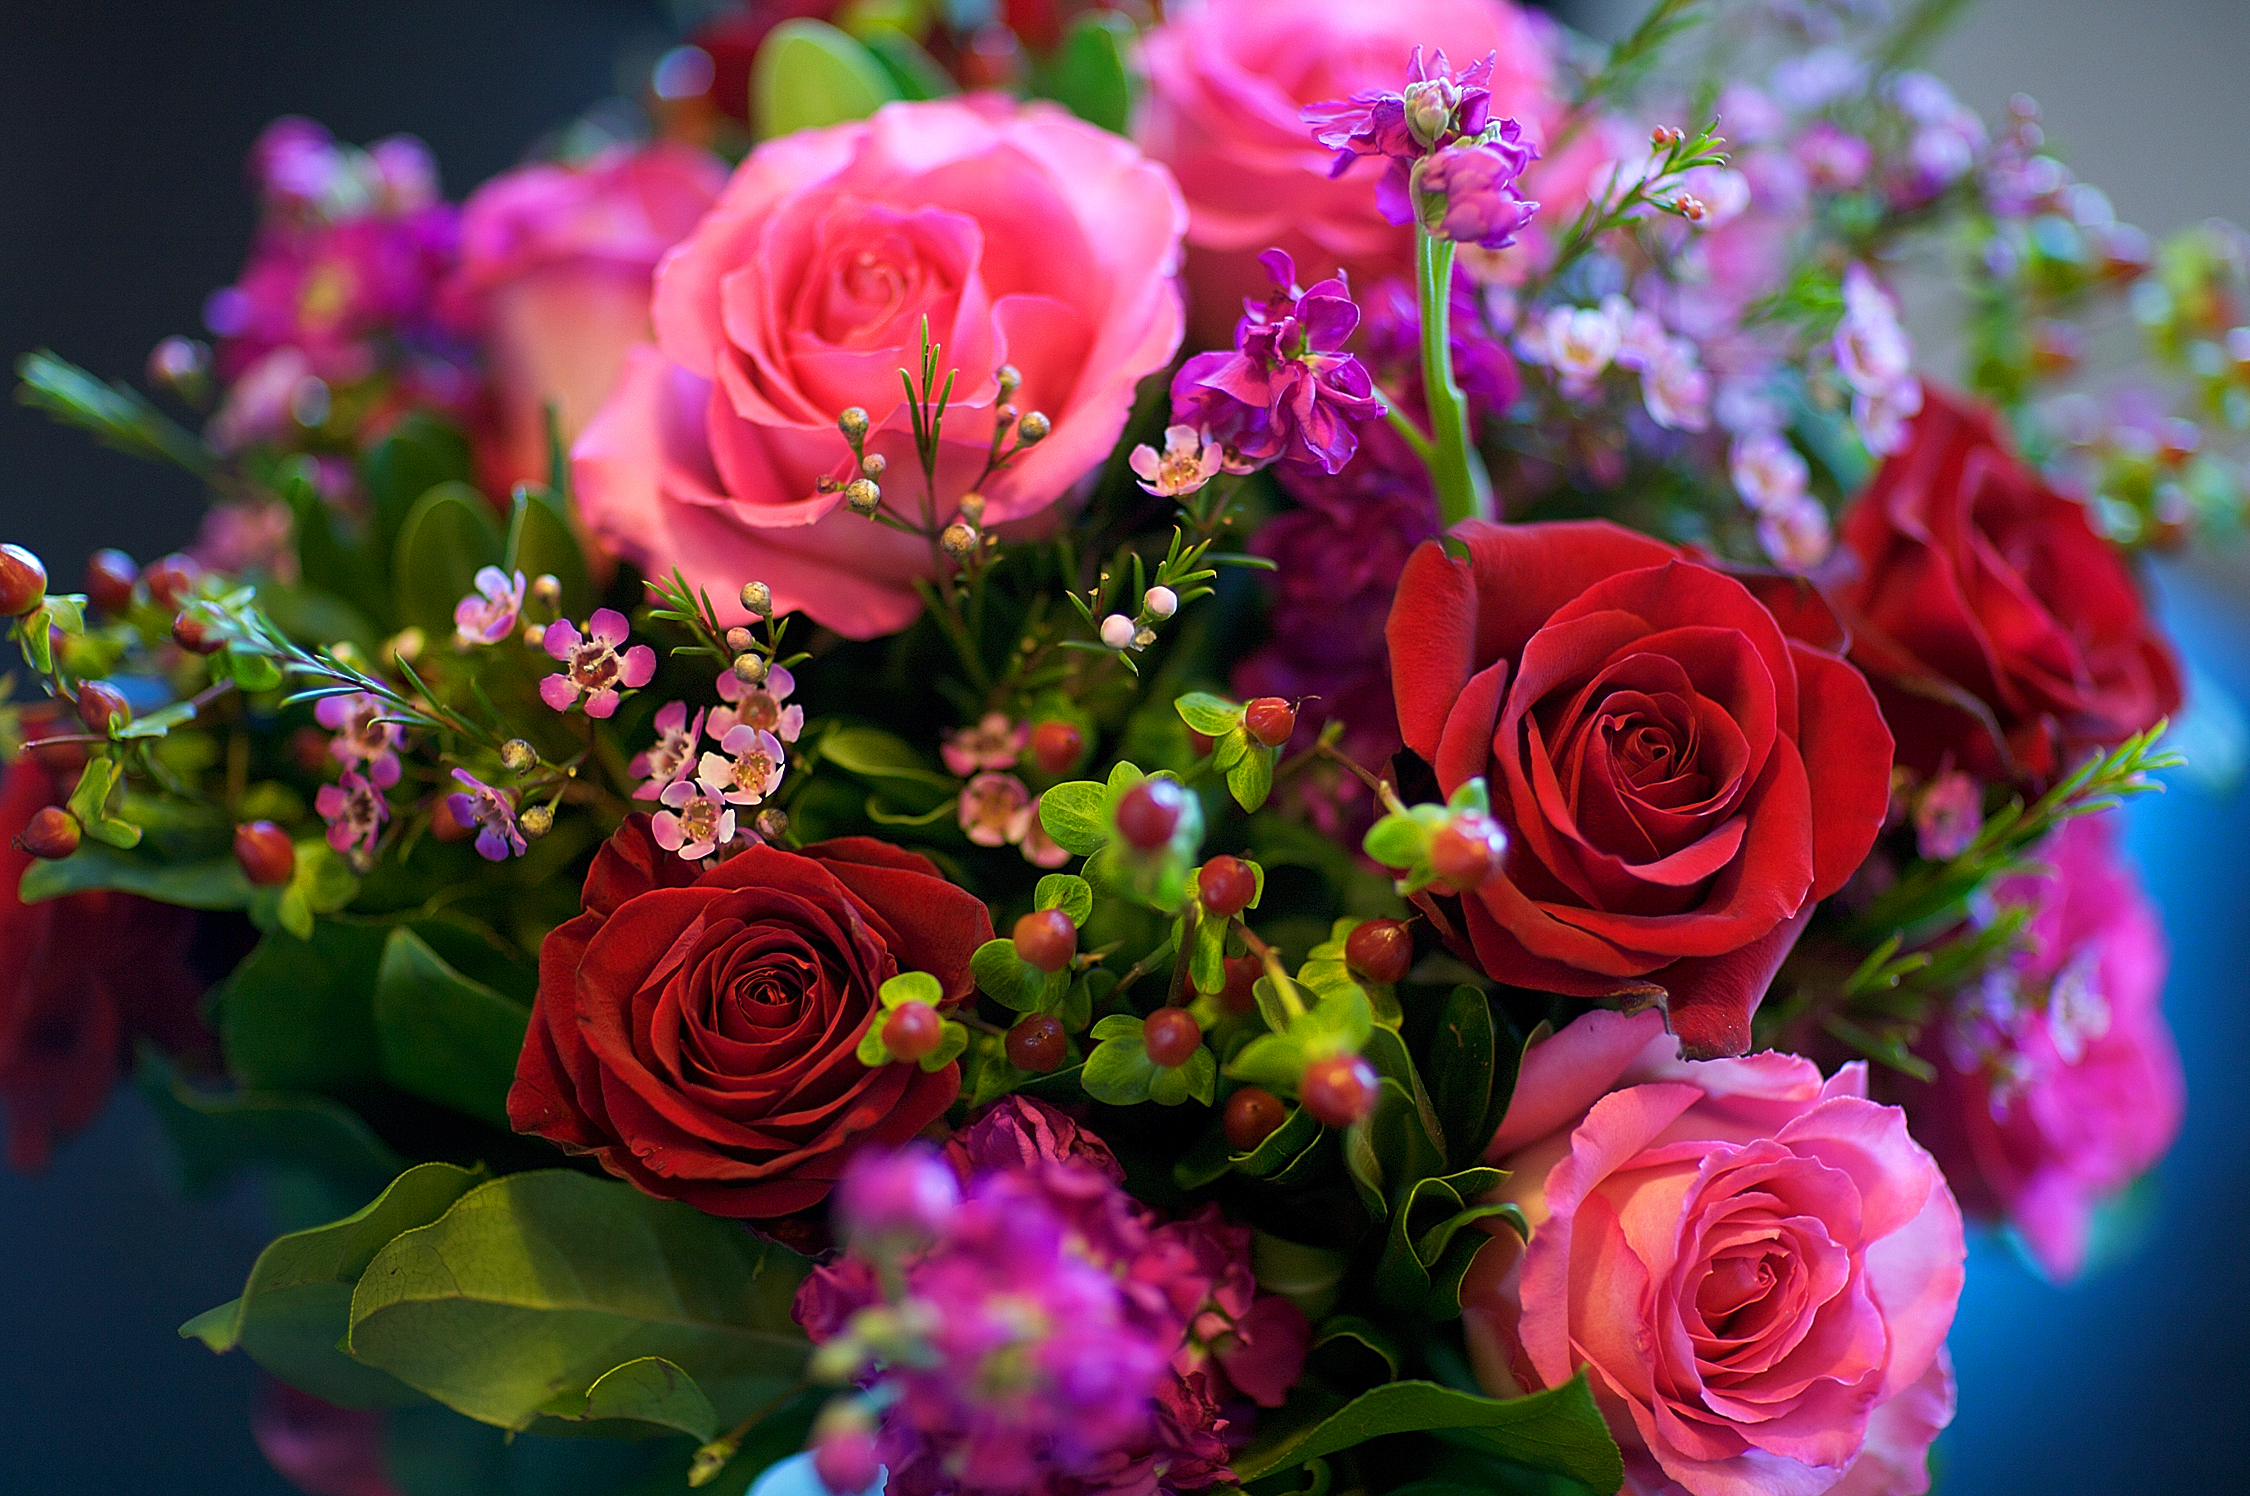 pink flower, bouquet, earth, rose, colorful, colors, flower, red flower, flowers